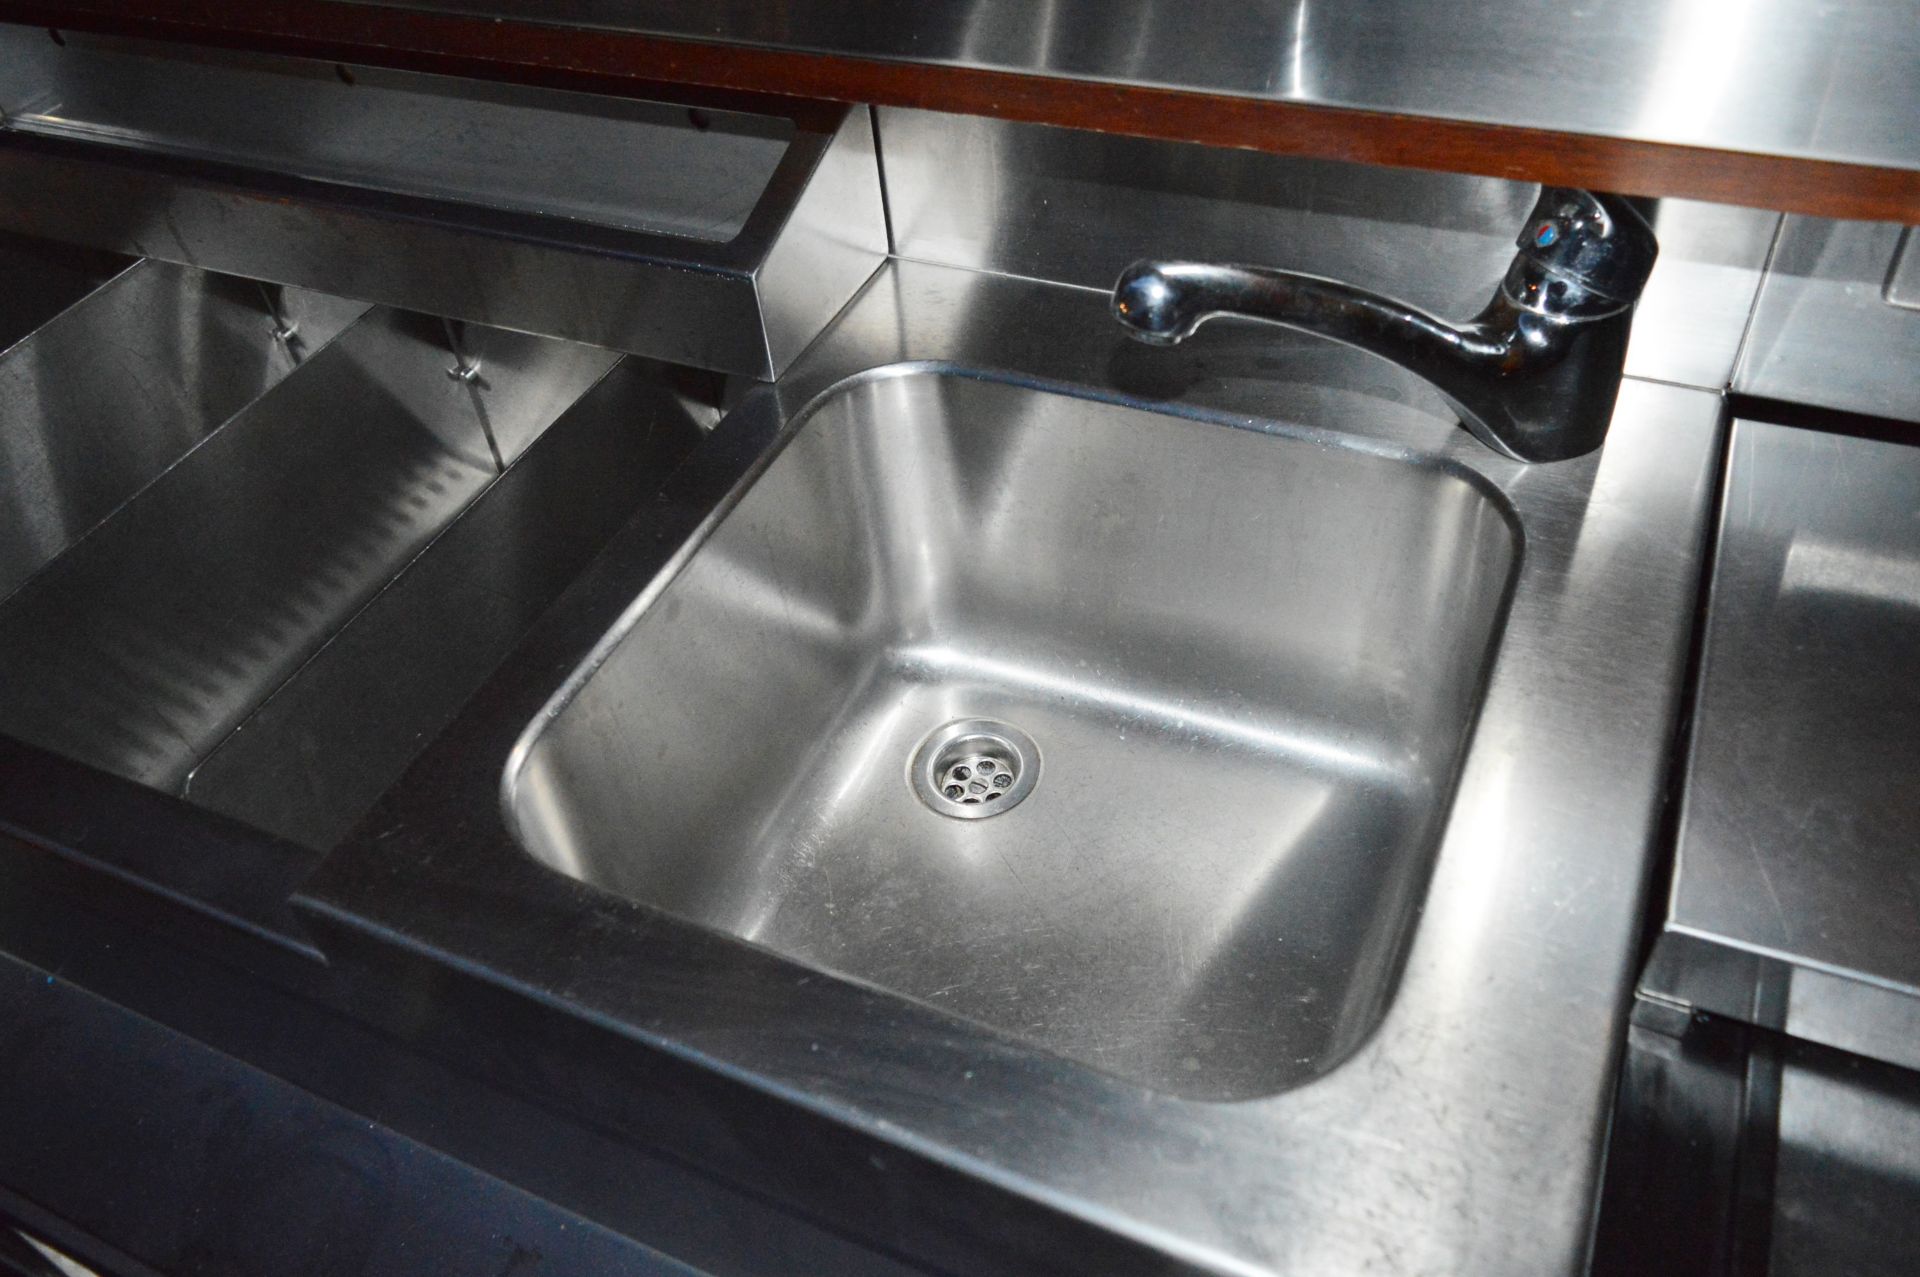 1 x Stainless Steel Double Speed Bar With Two Ice Wells and Two Sink Basins - More Info to - Image 5 of 10